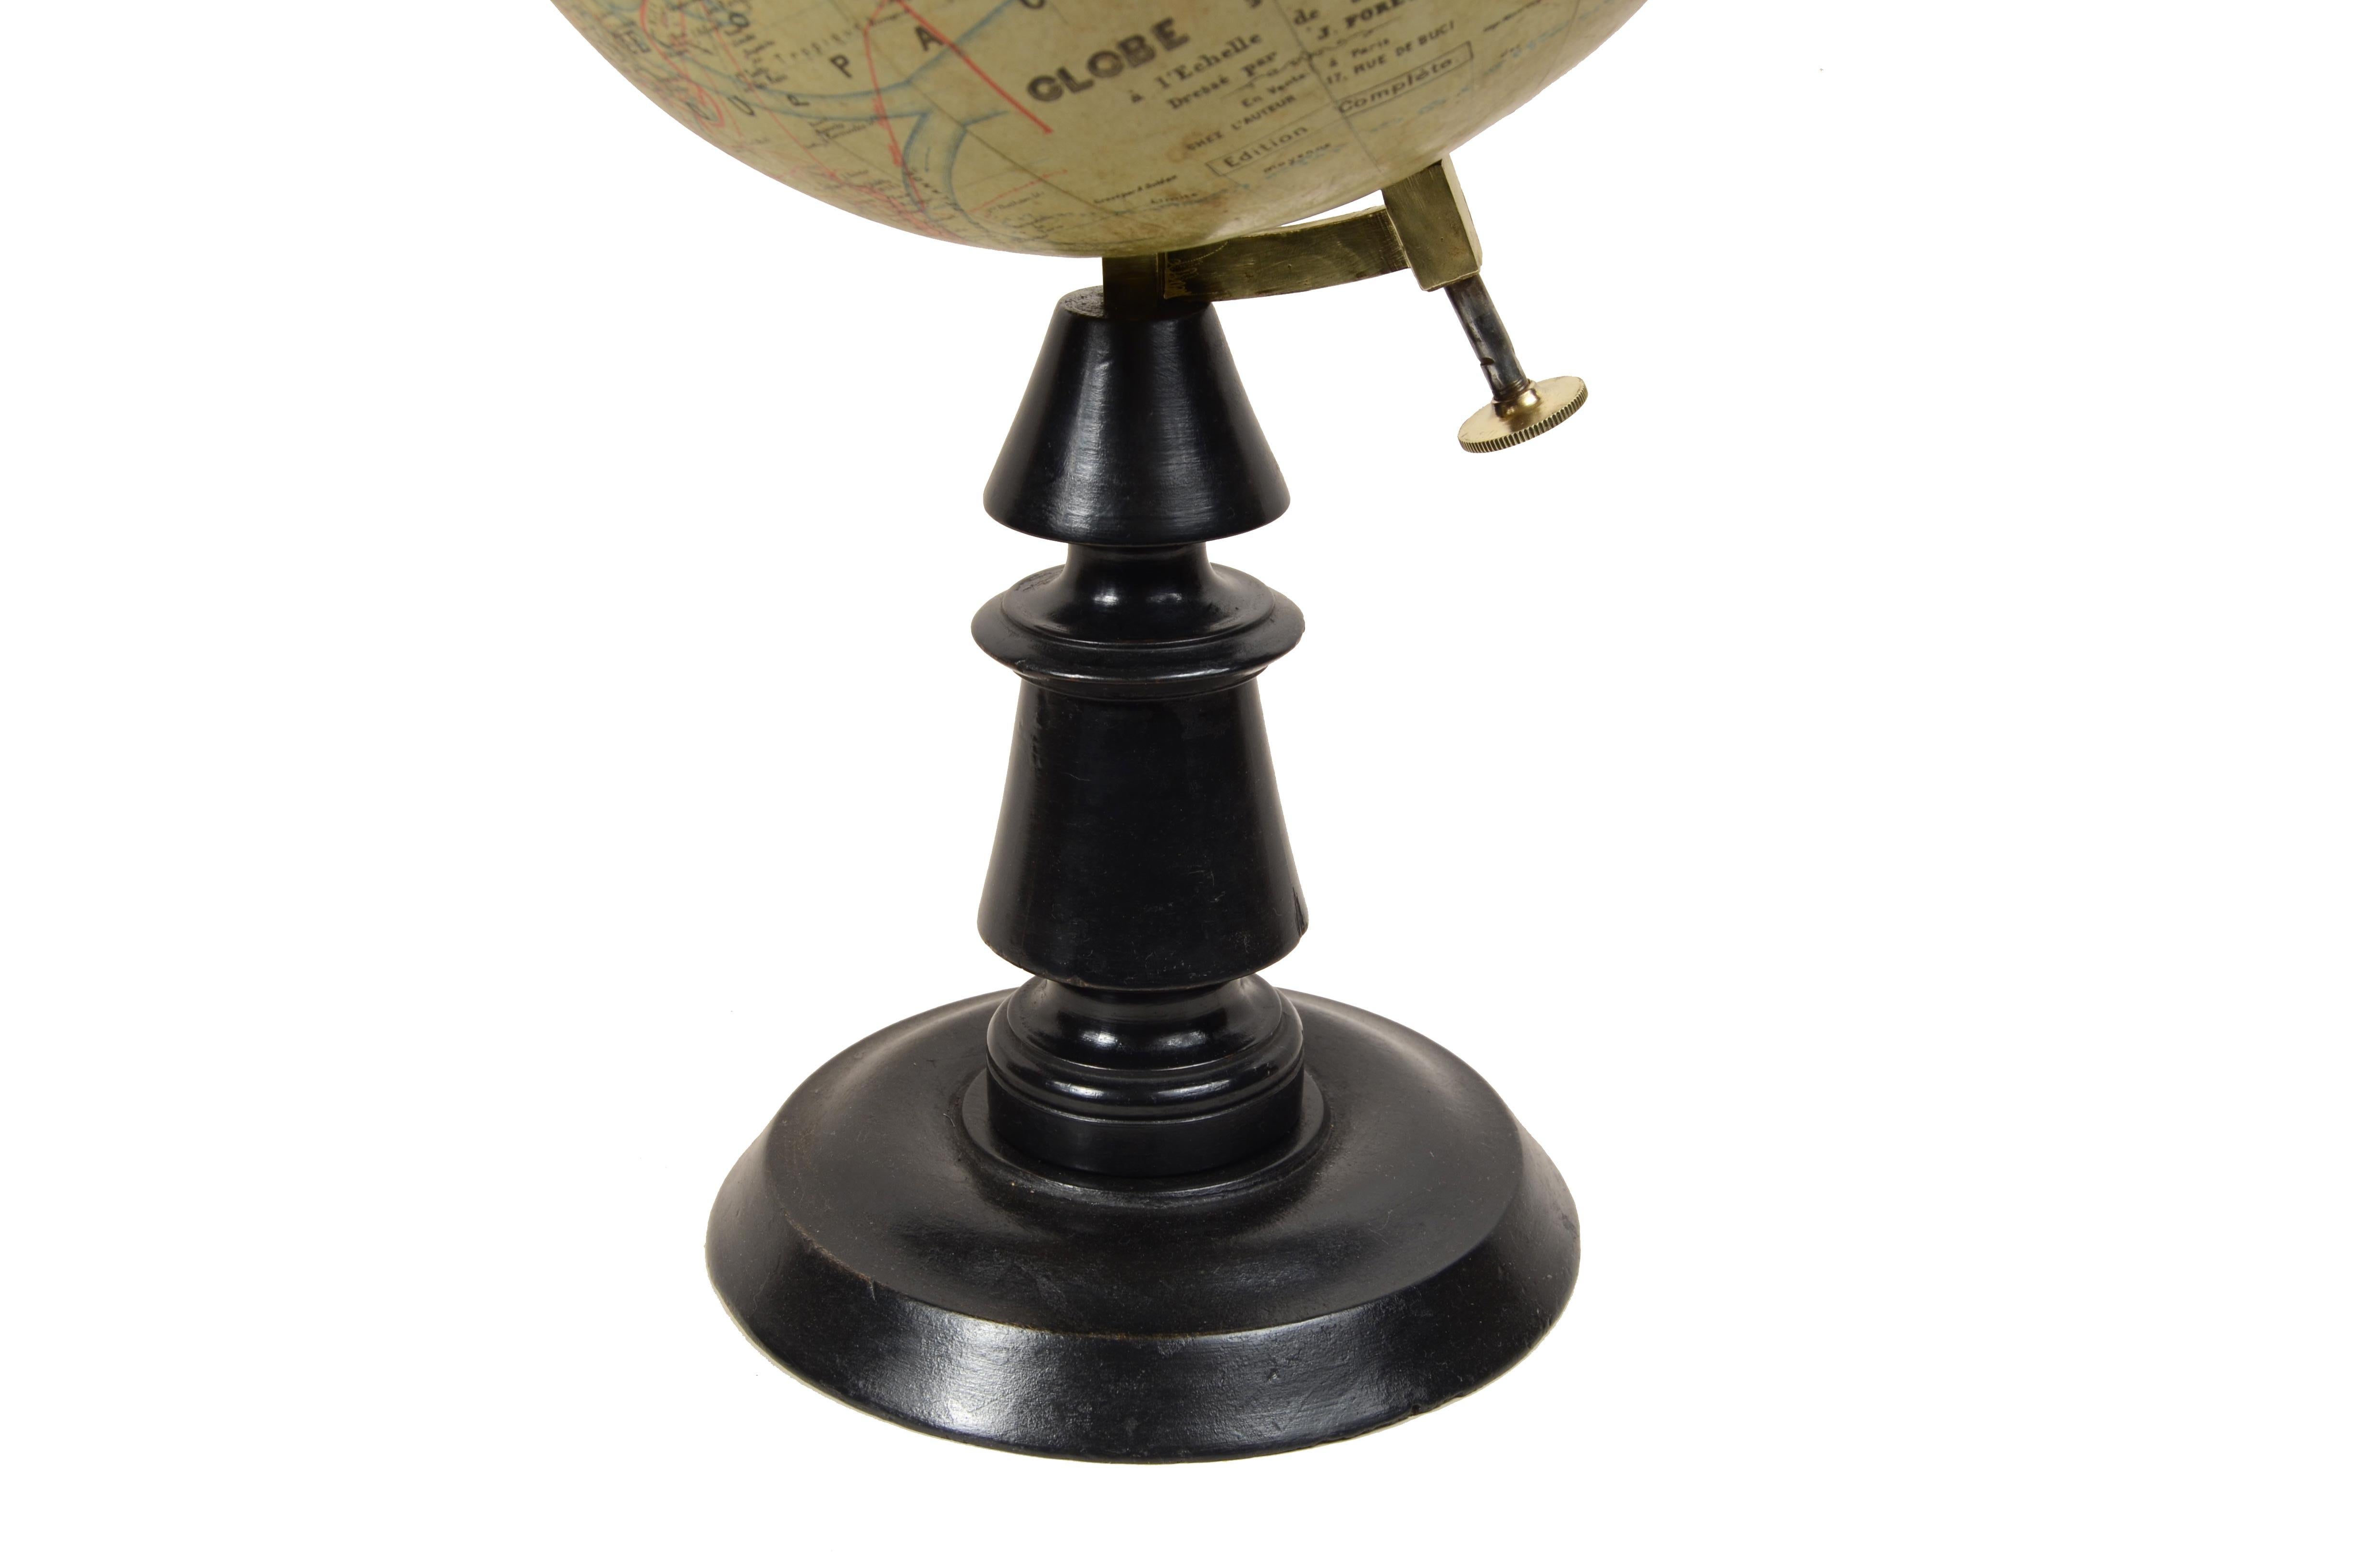 Earth globe edited in the late 19th century by French geographer J. Forest For Sale 6